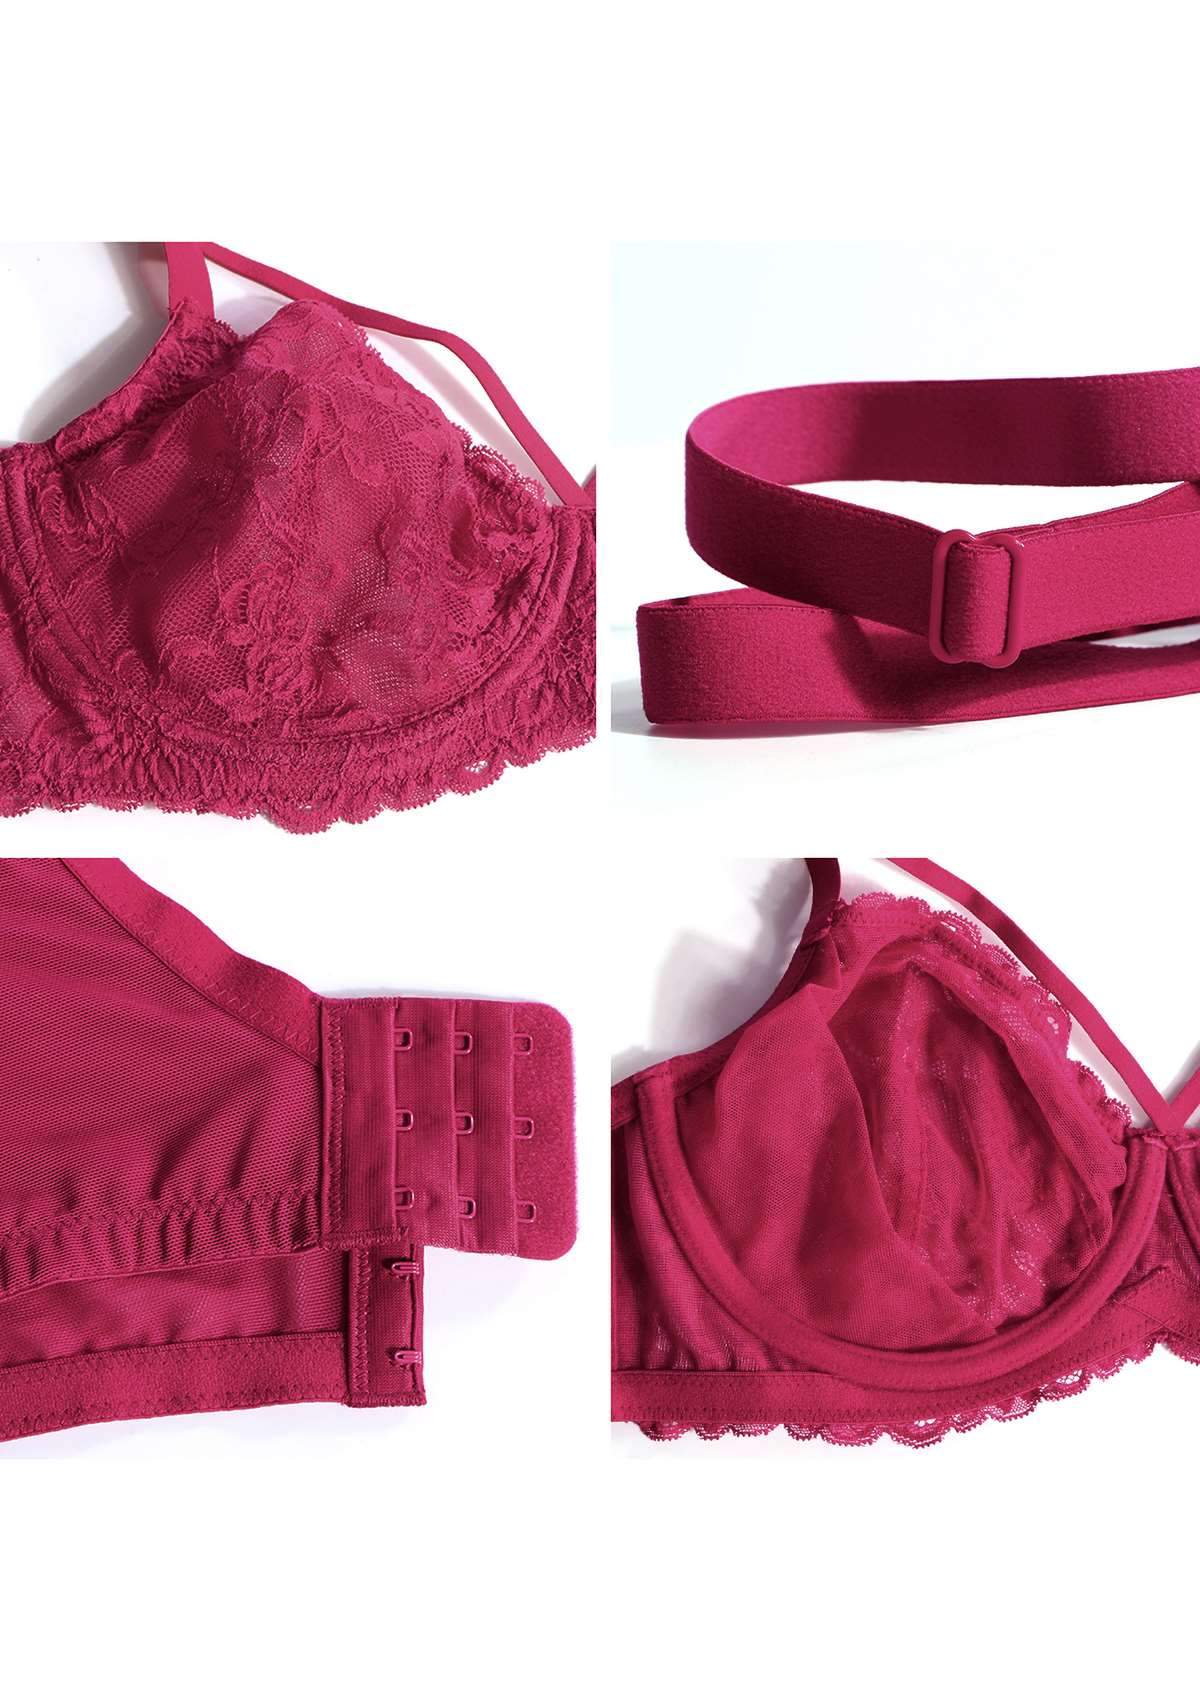 HSIA Pretty In Petals Sexy Lace Bra: Full Coverage Back Smoothing Bra - Red / 42 / DDD/F